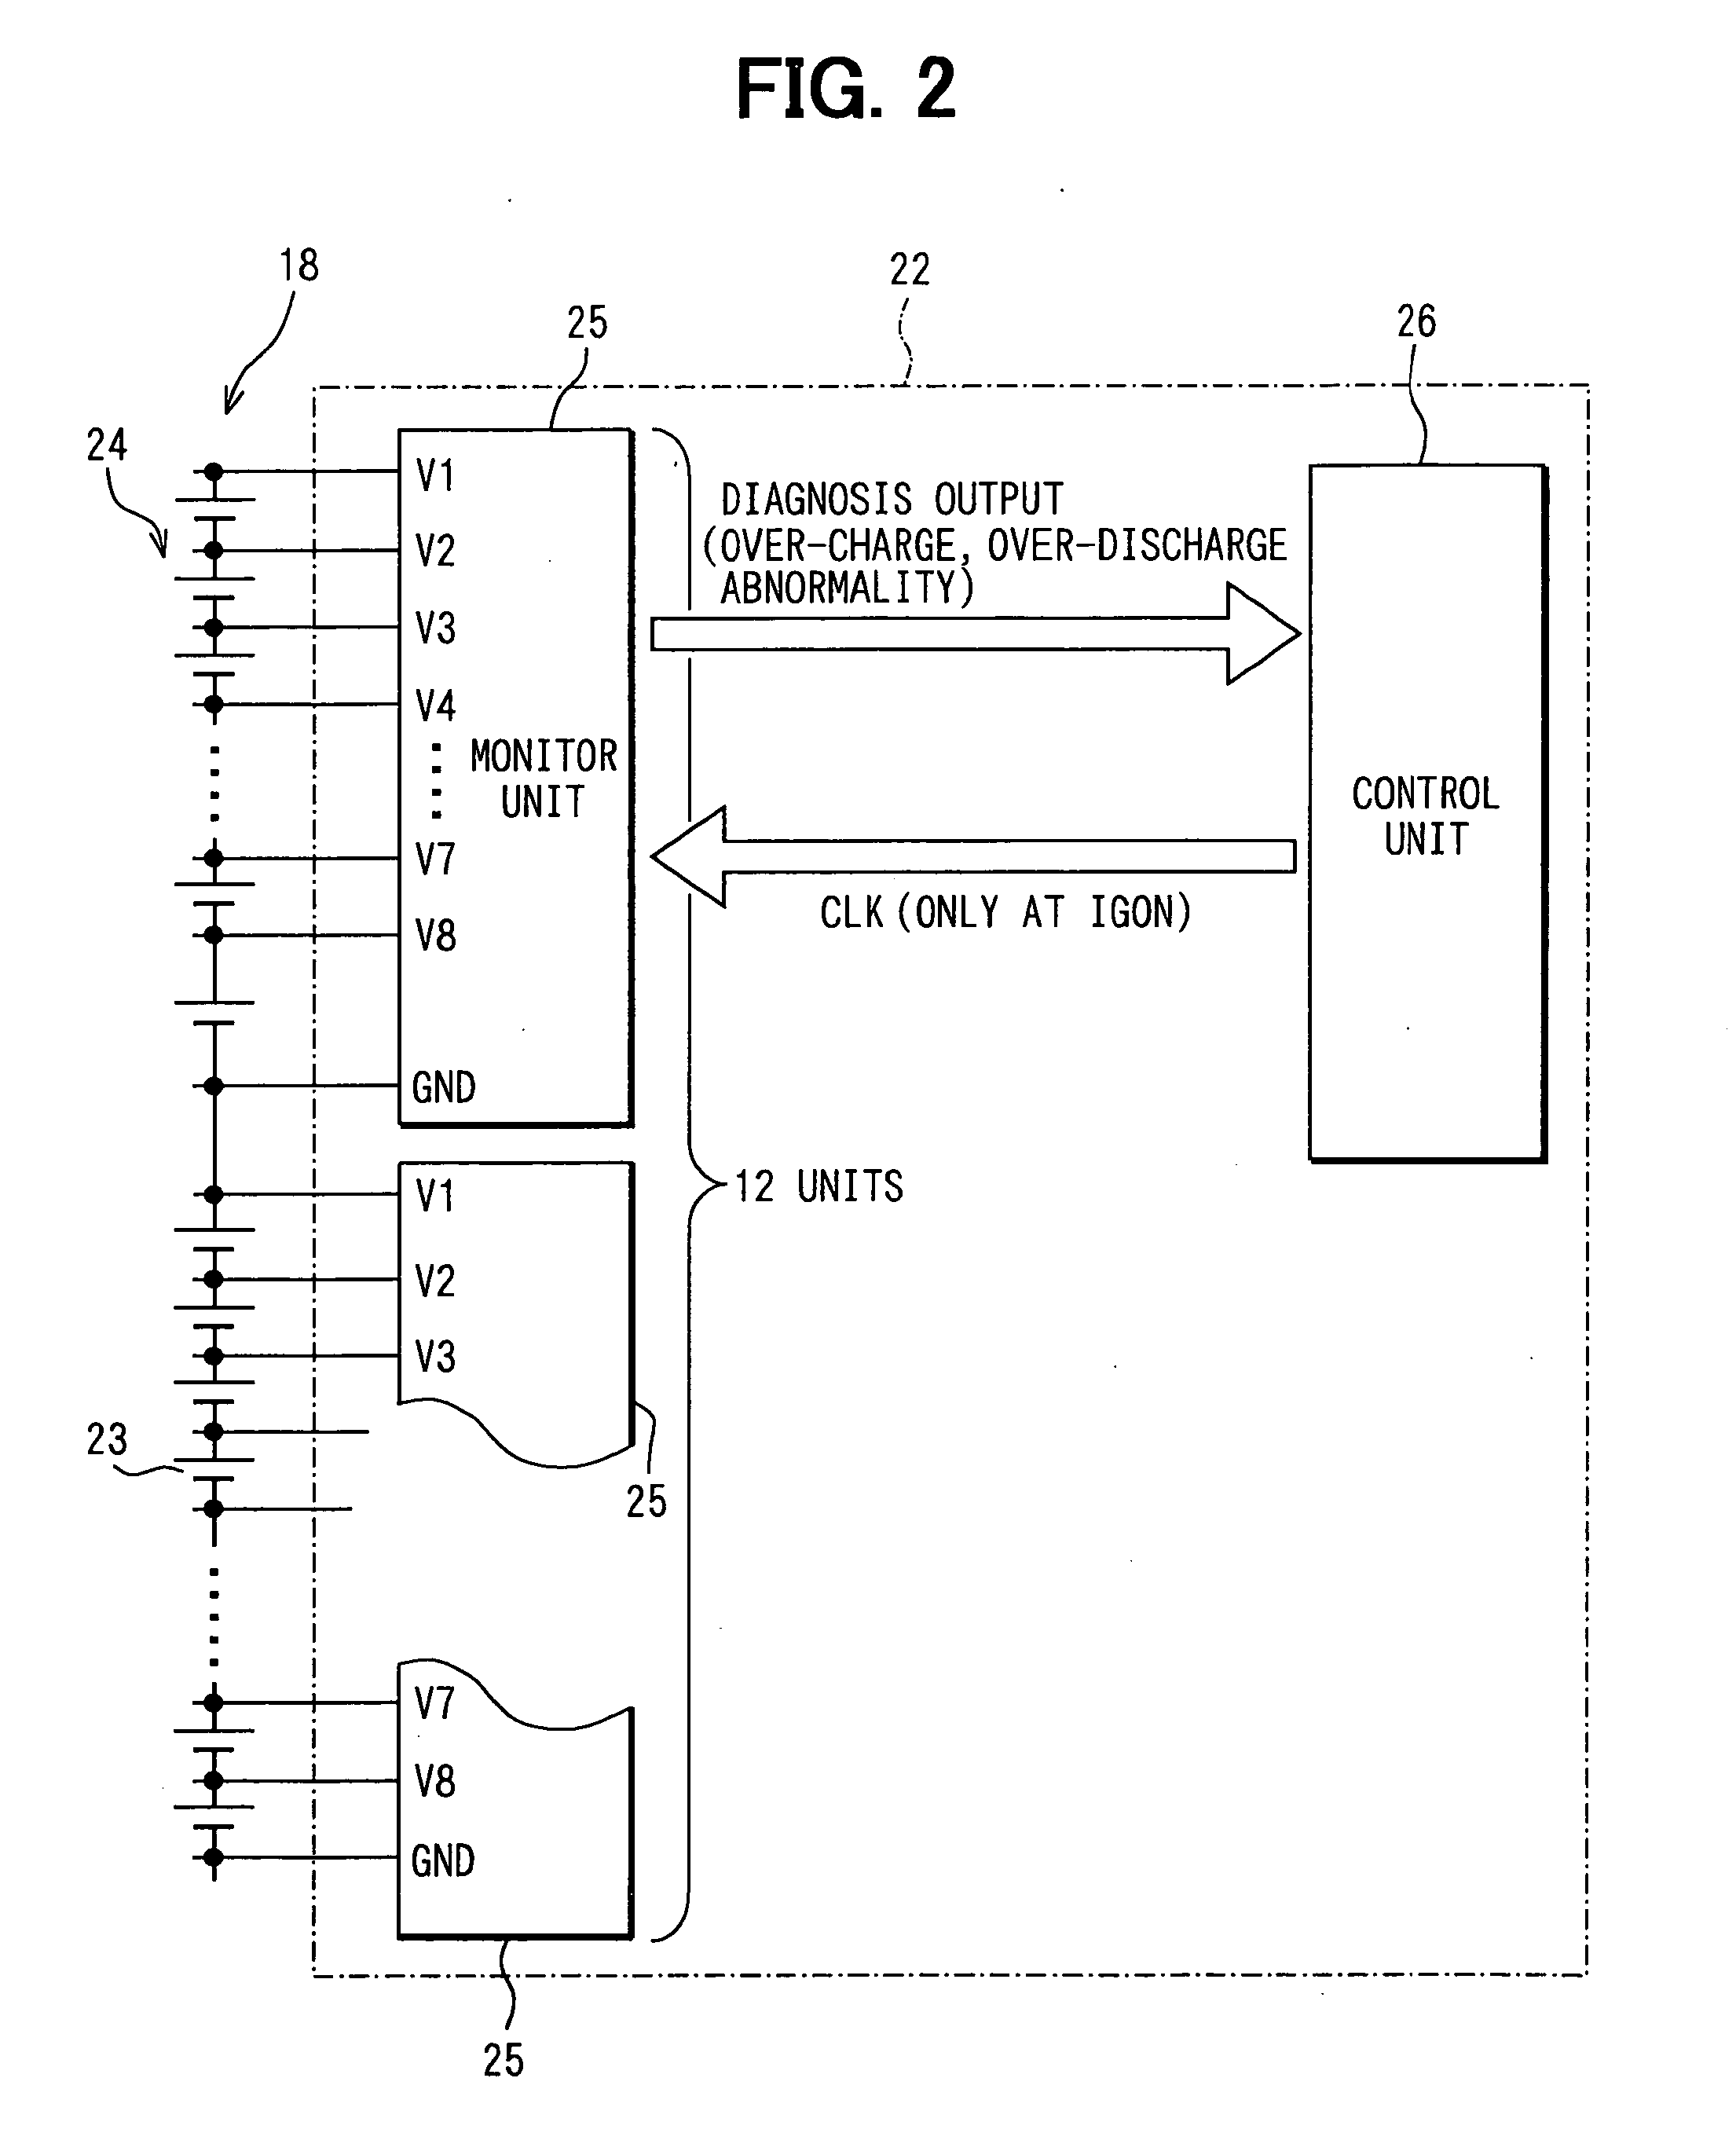 Circuit system for a battery electronic control unit